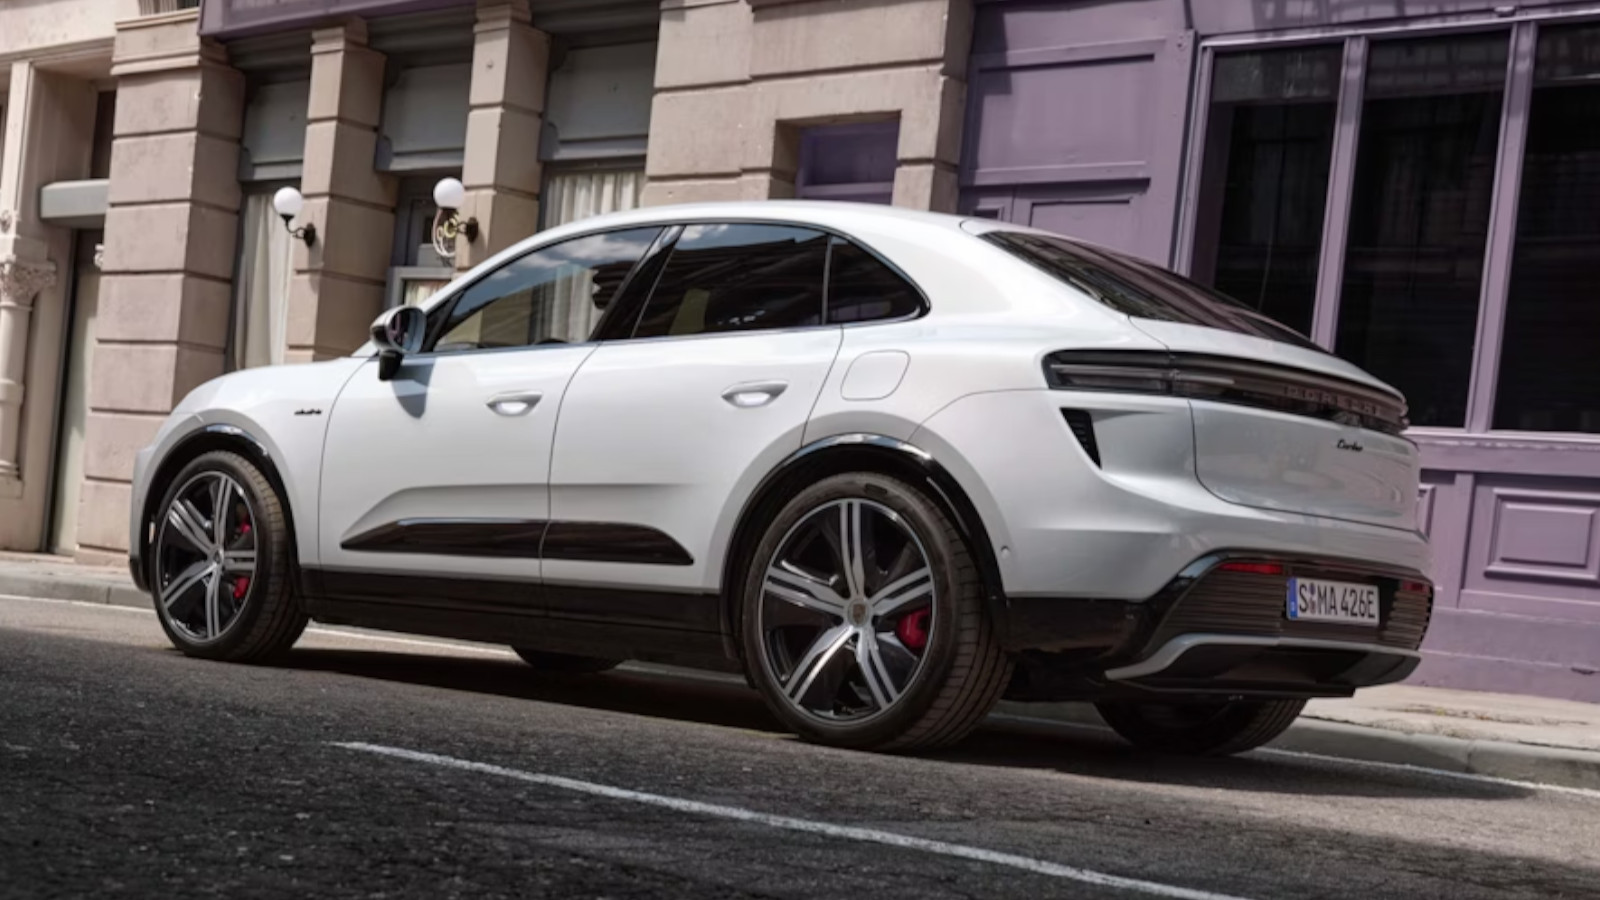 New Porsche Macan EV: A Paradigm Shift in Performance and Design